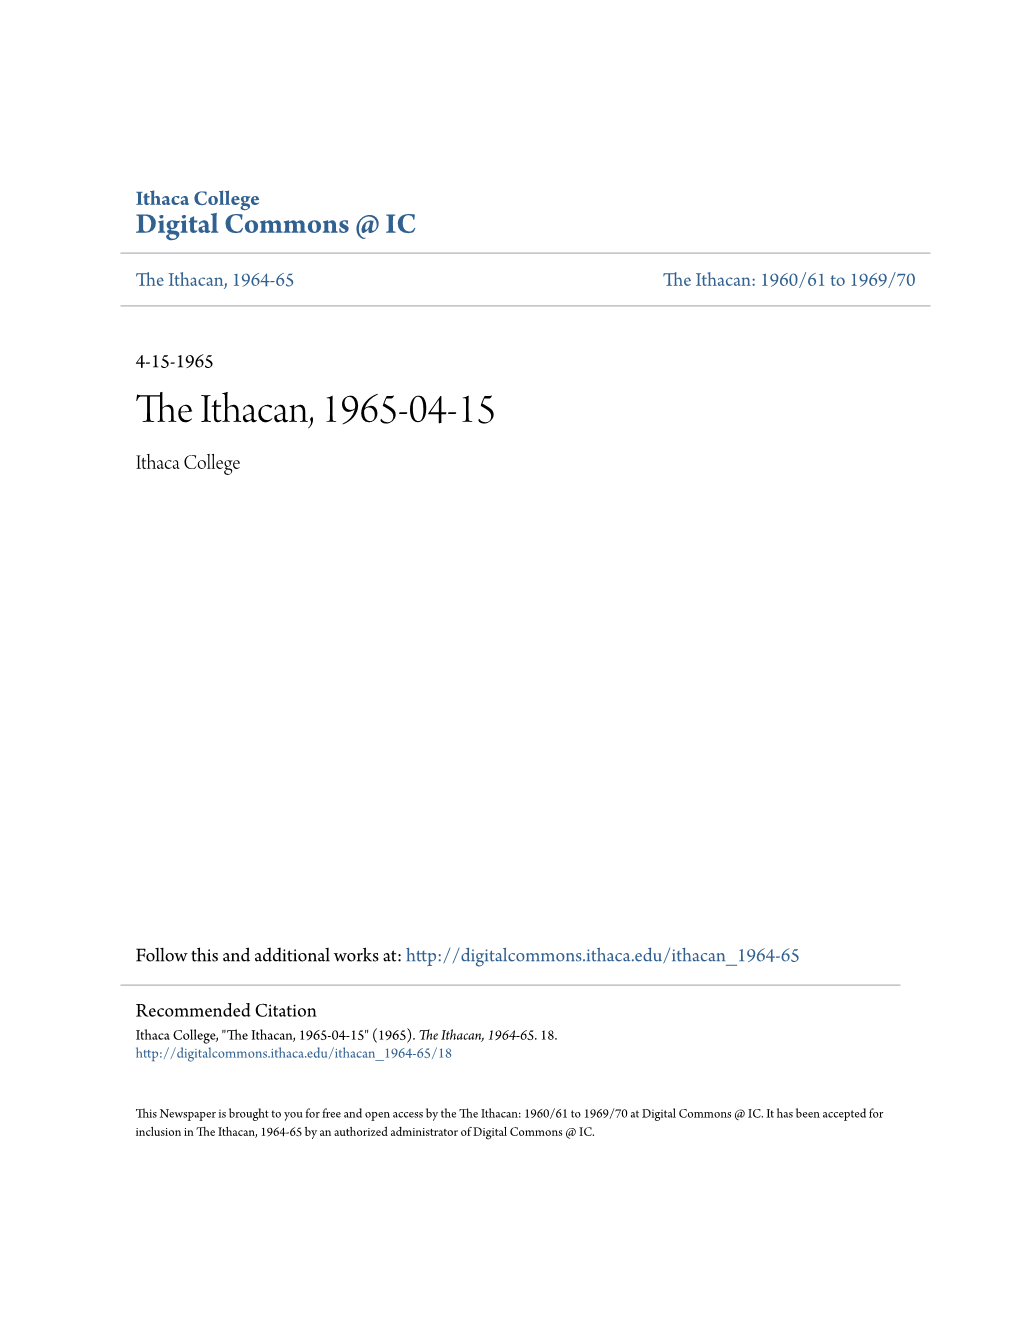 The Ithacan, 1965-04-15